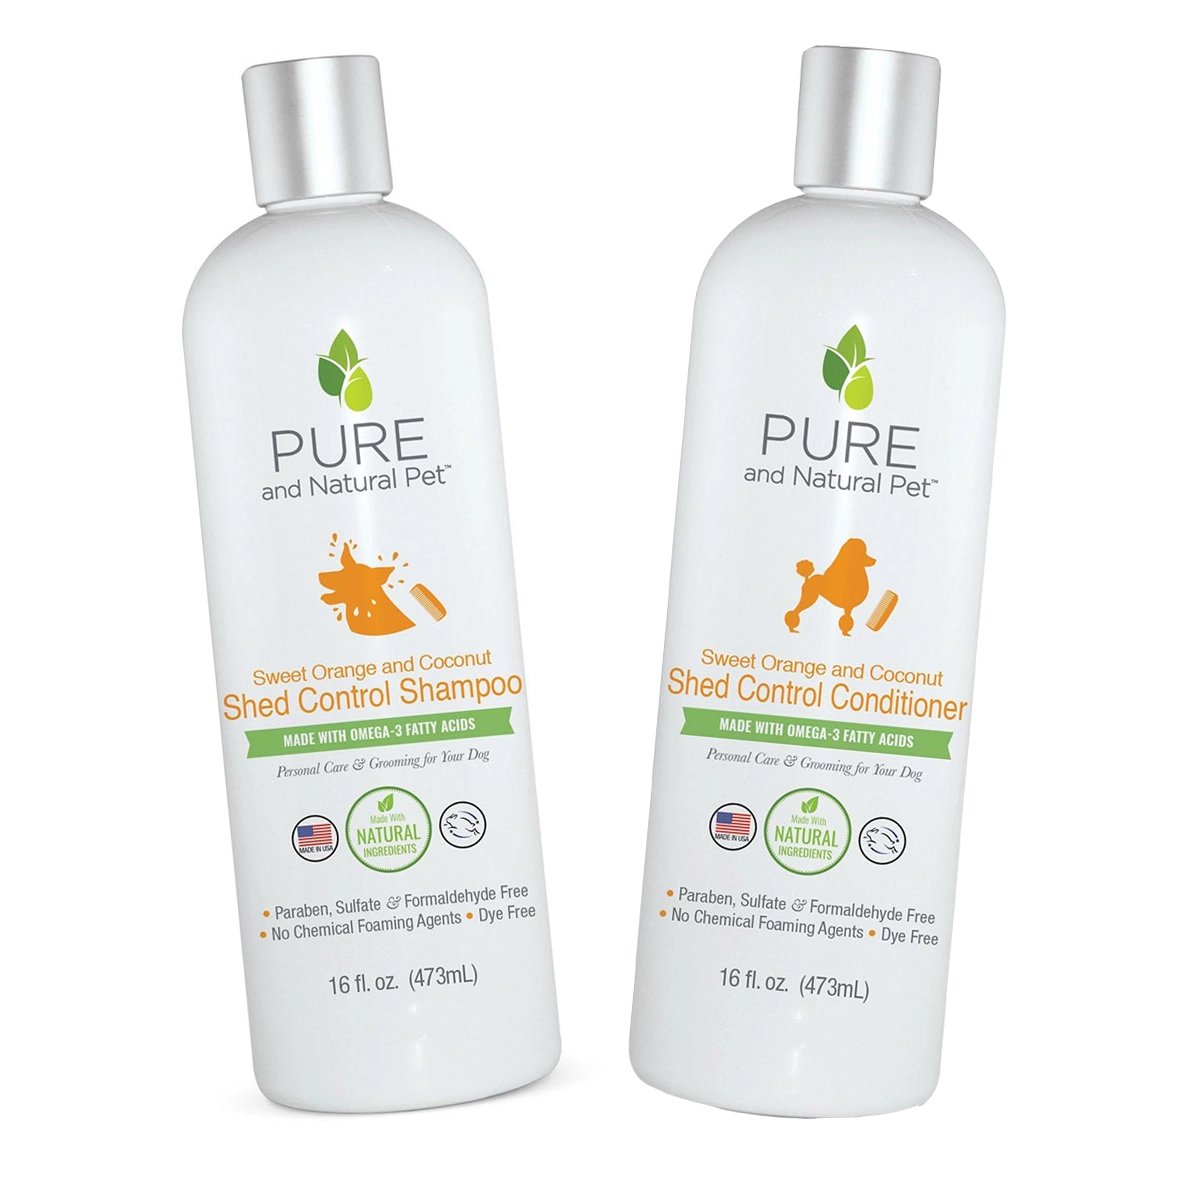 Grooming Bundle - Shed Control Shampoo and Conditioner for Dogs